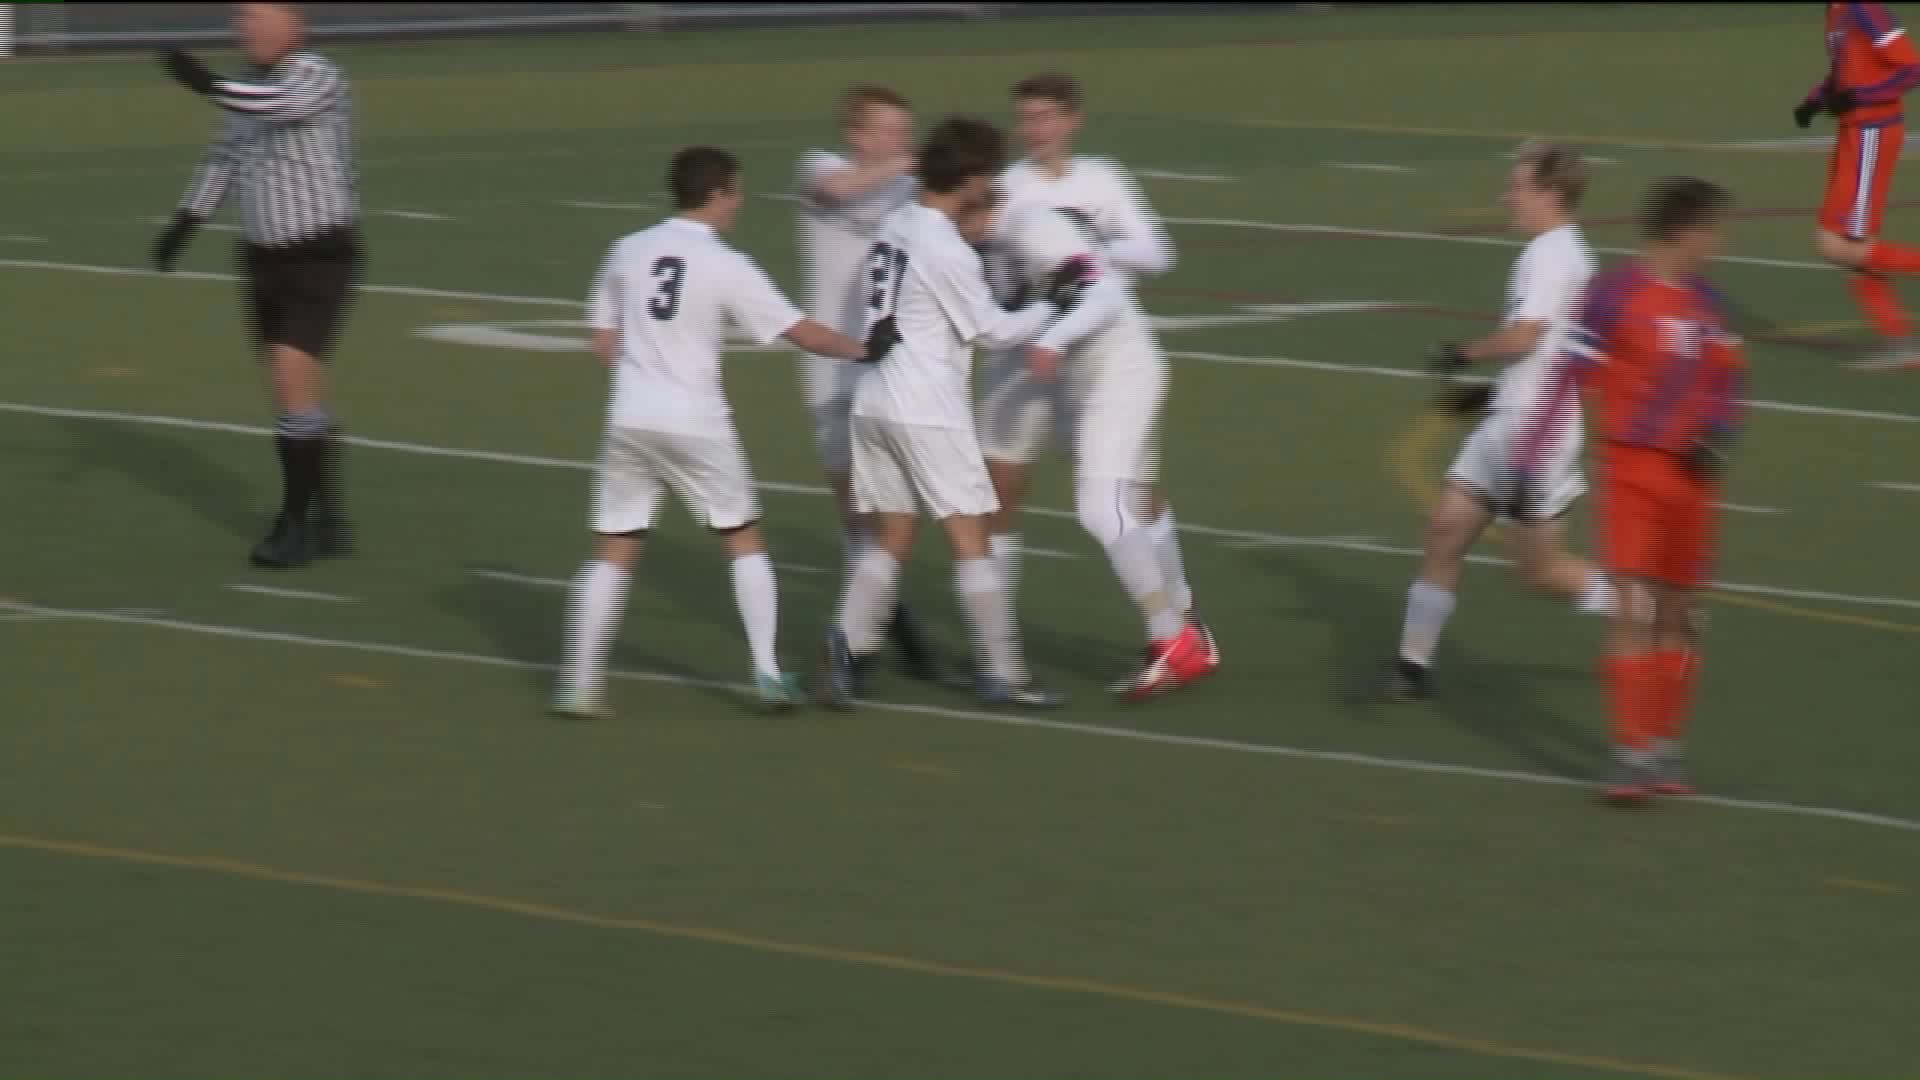 Mountain View Boys Soccer Falls to Camp Hill in States